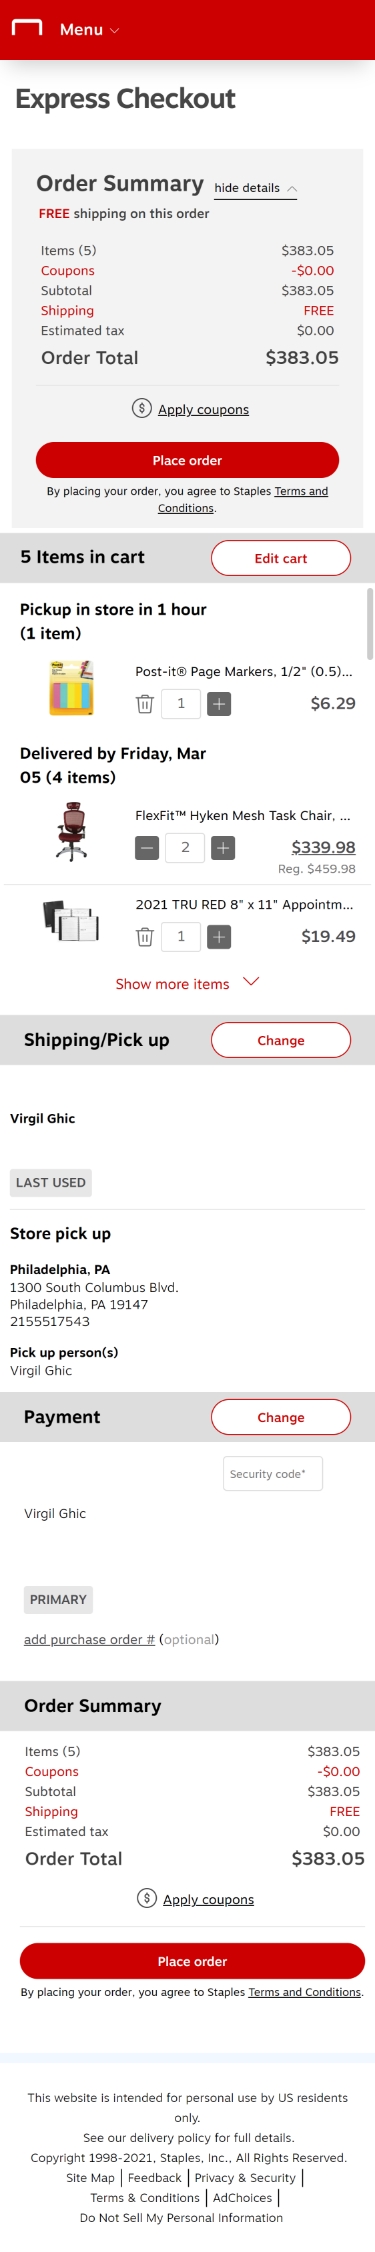 staples checkout page mobile